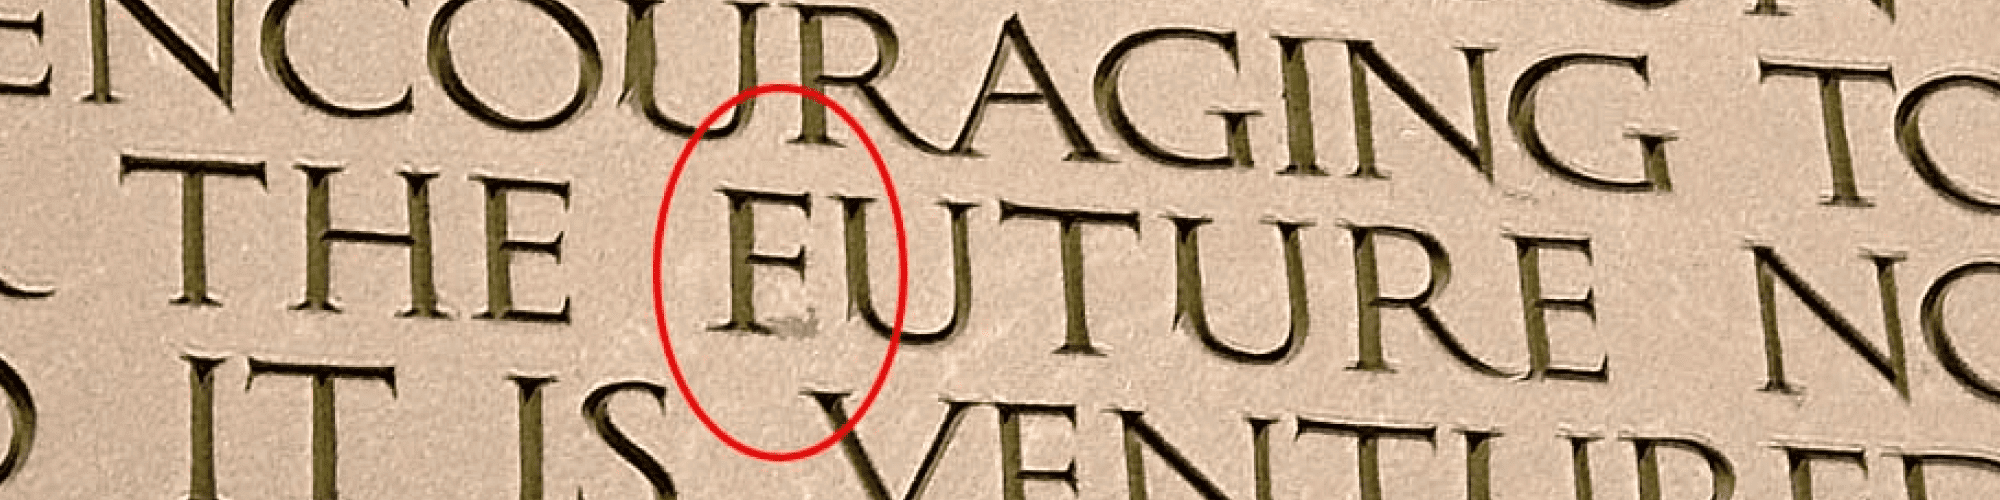 lincoln memorial typo set in stone as one of history's greatest typos